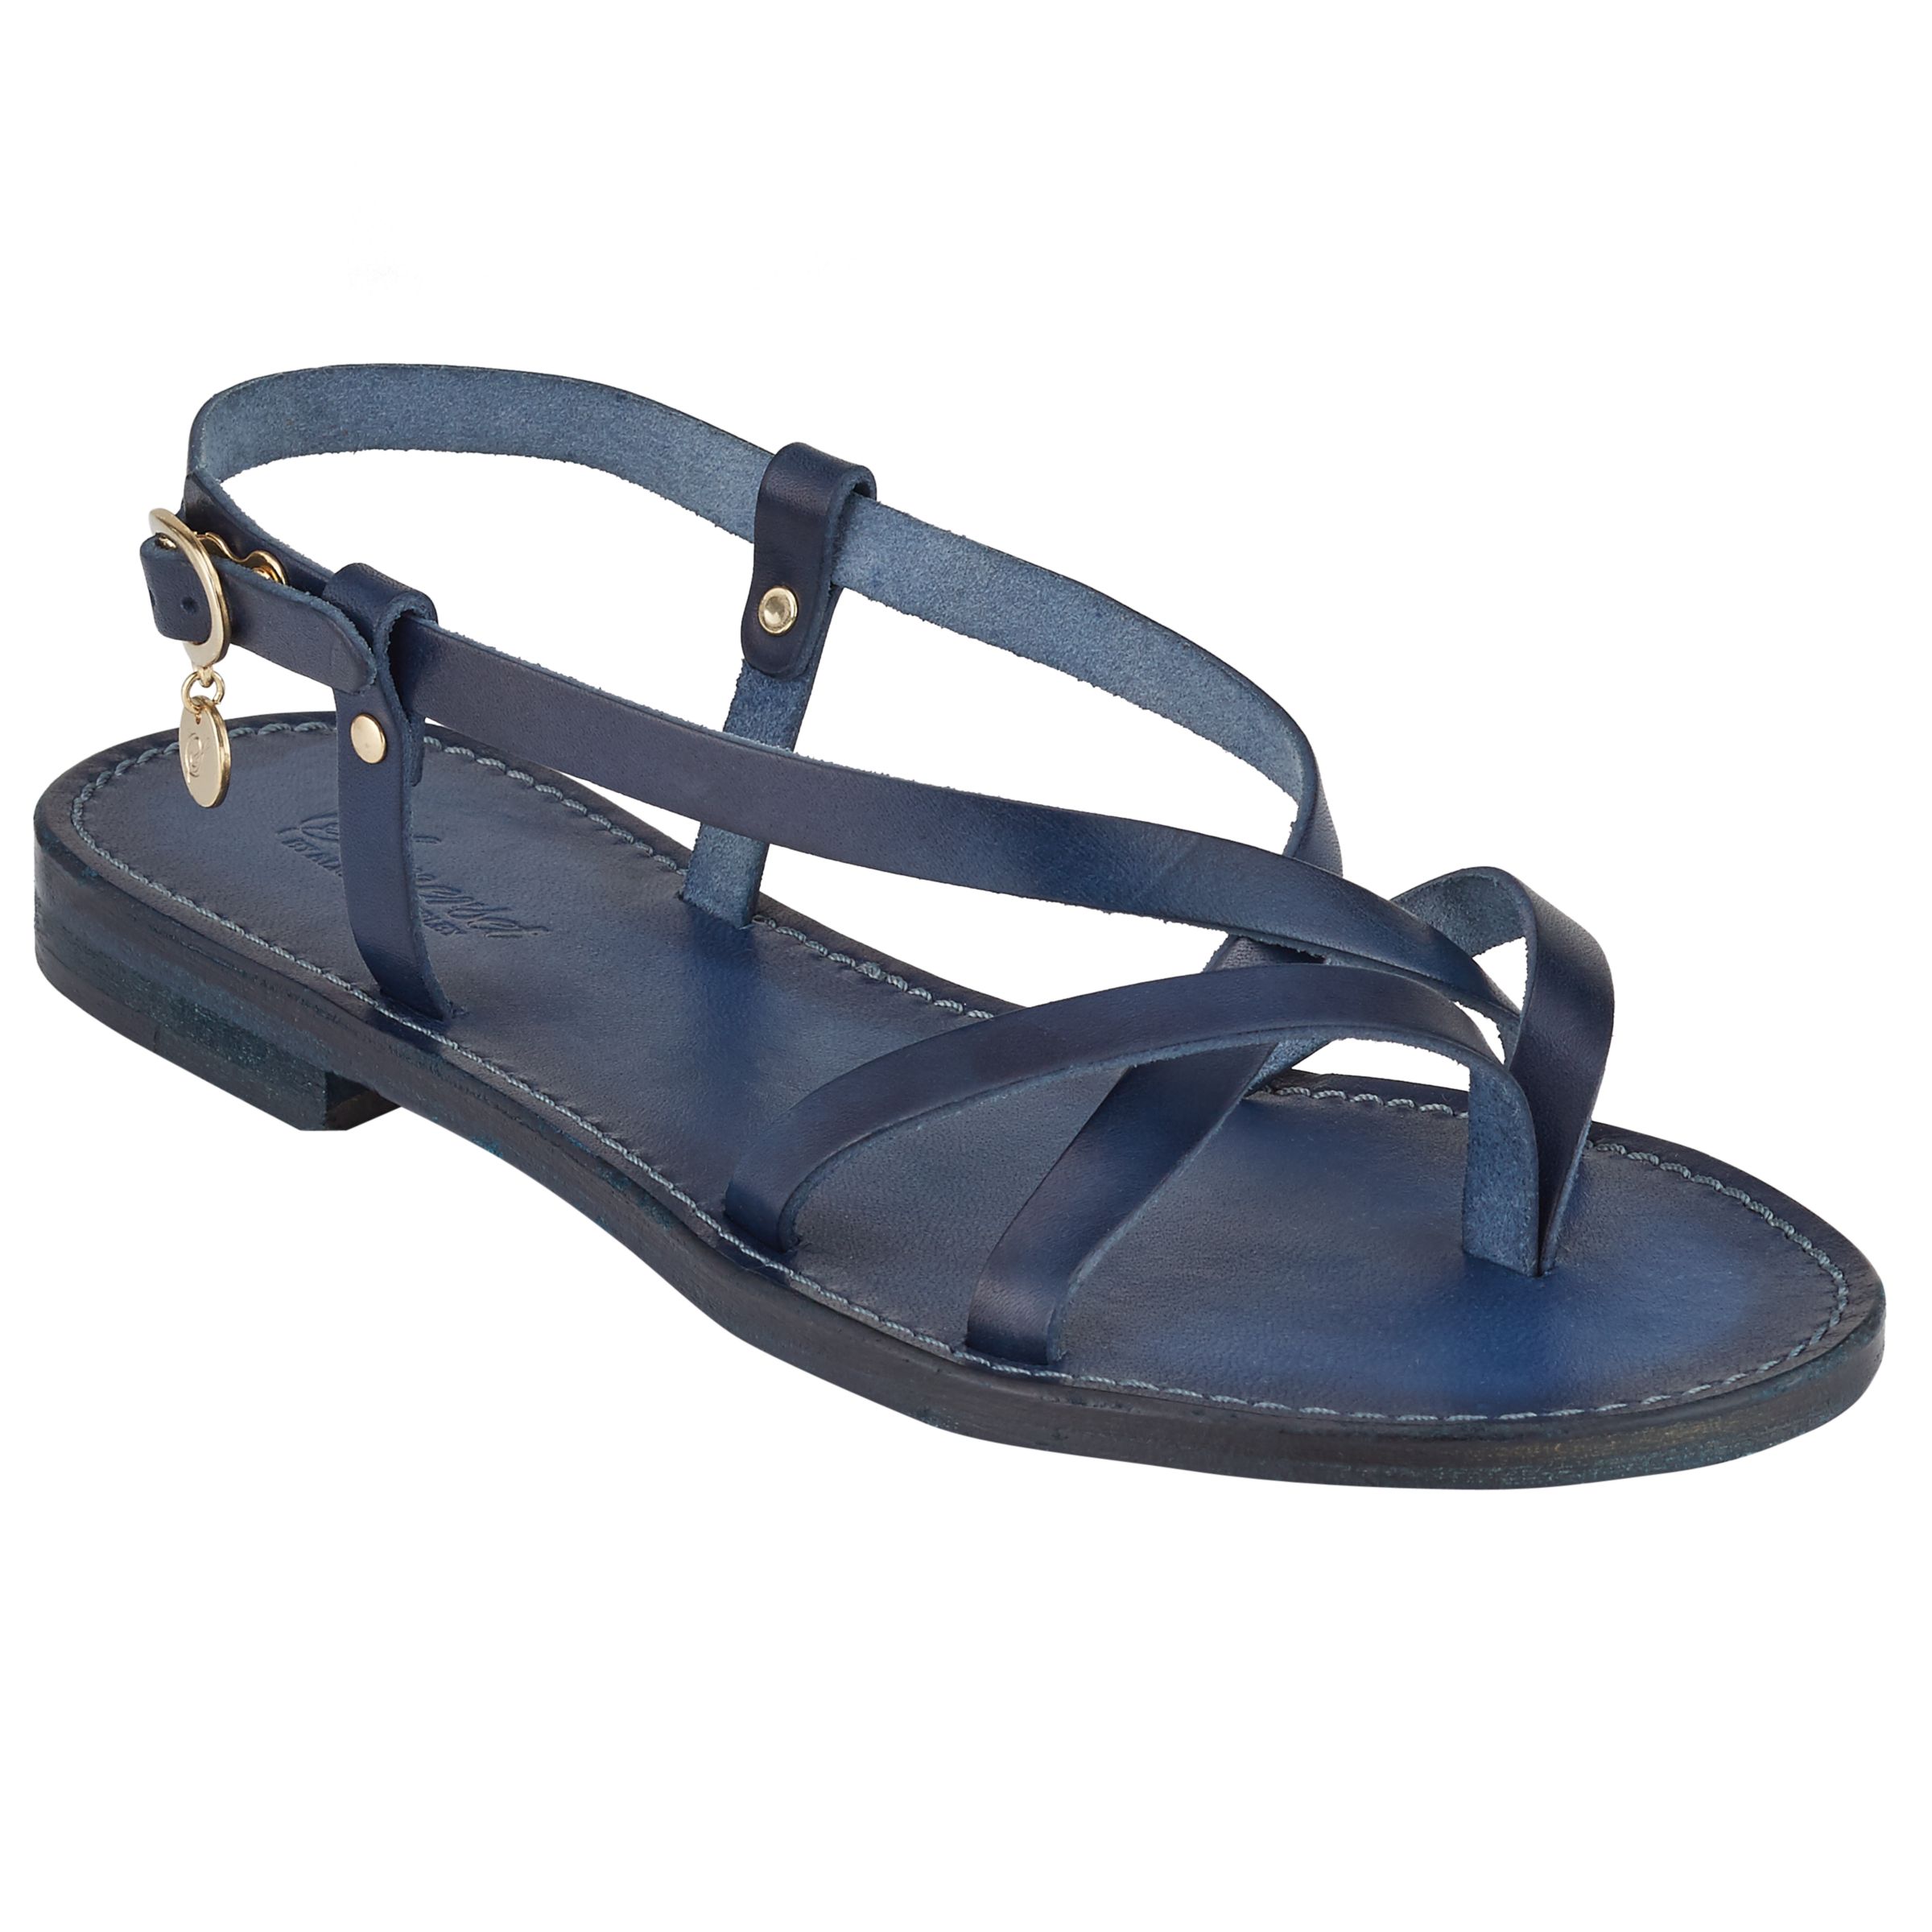 Somerset by Alice Temperley Loxton Sandals, Navy, 6